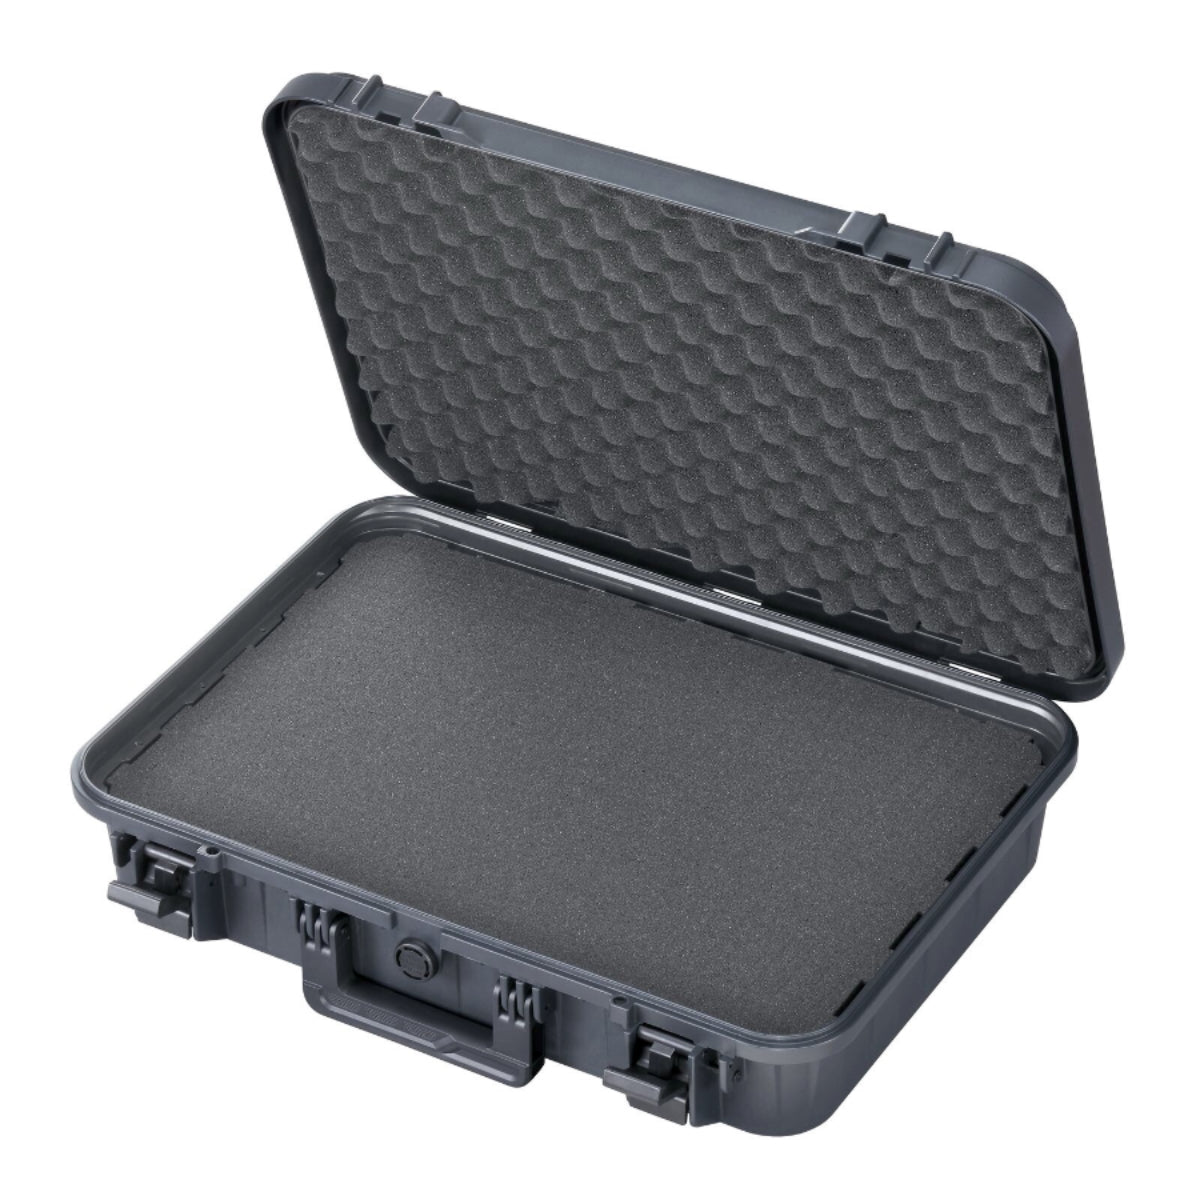 SP ECO 90S Grey Carry Case, Cubed Foam, ID: L520xW350xH125mm